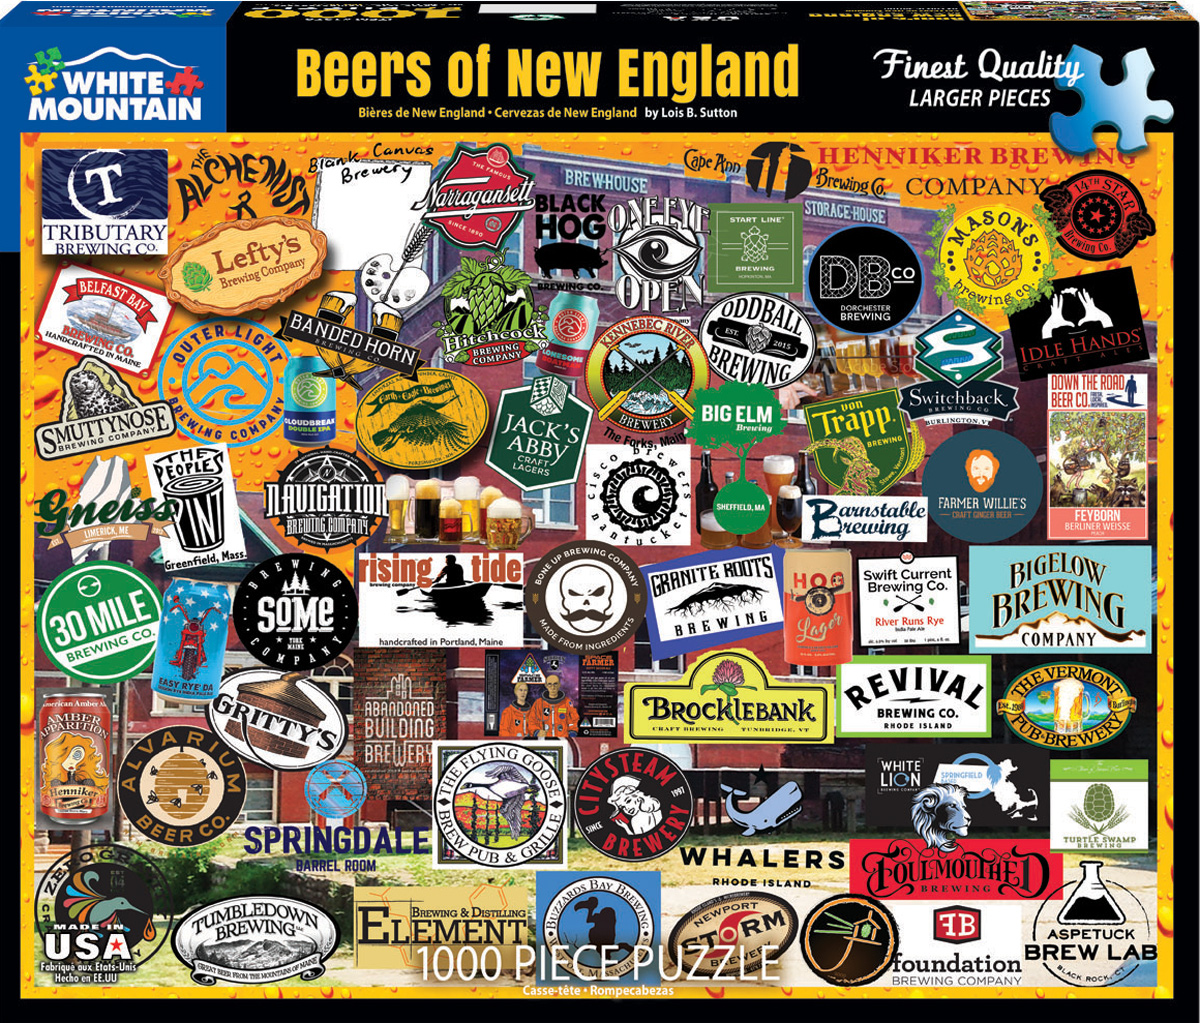 Beers of New England